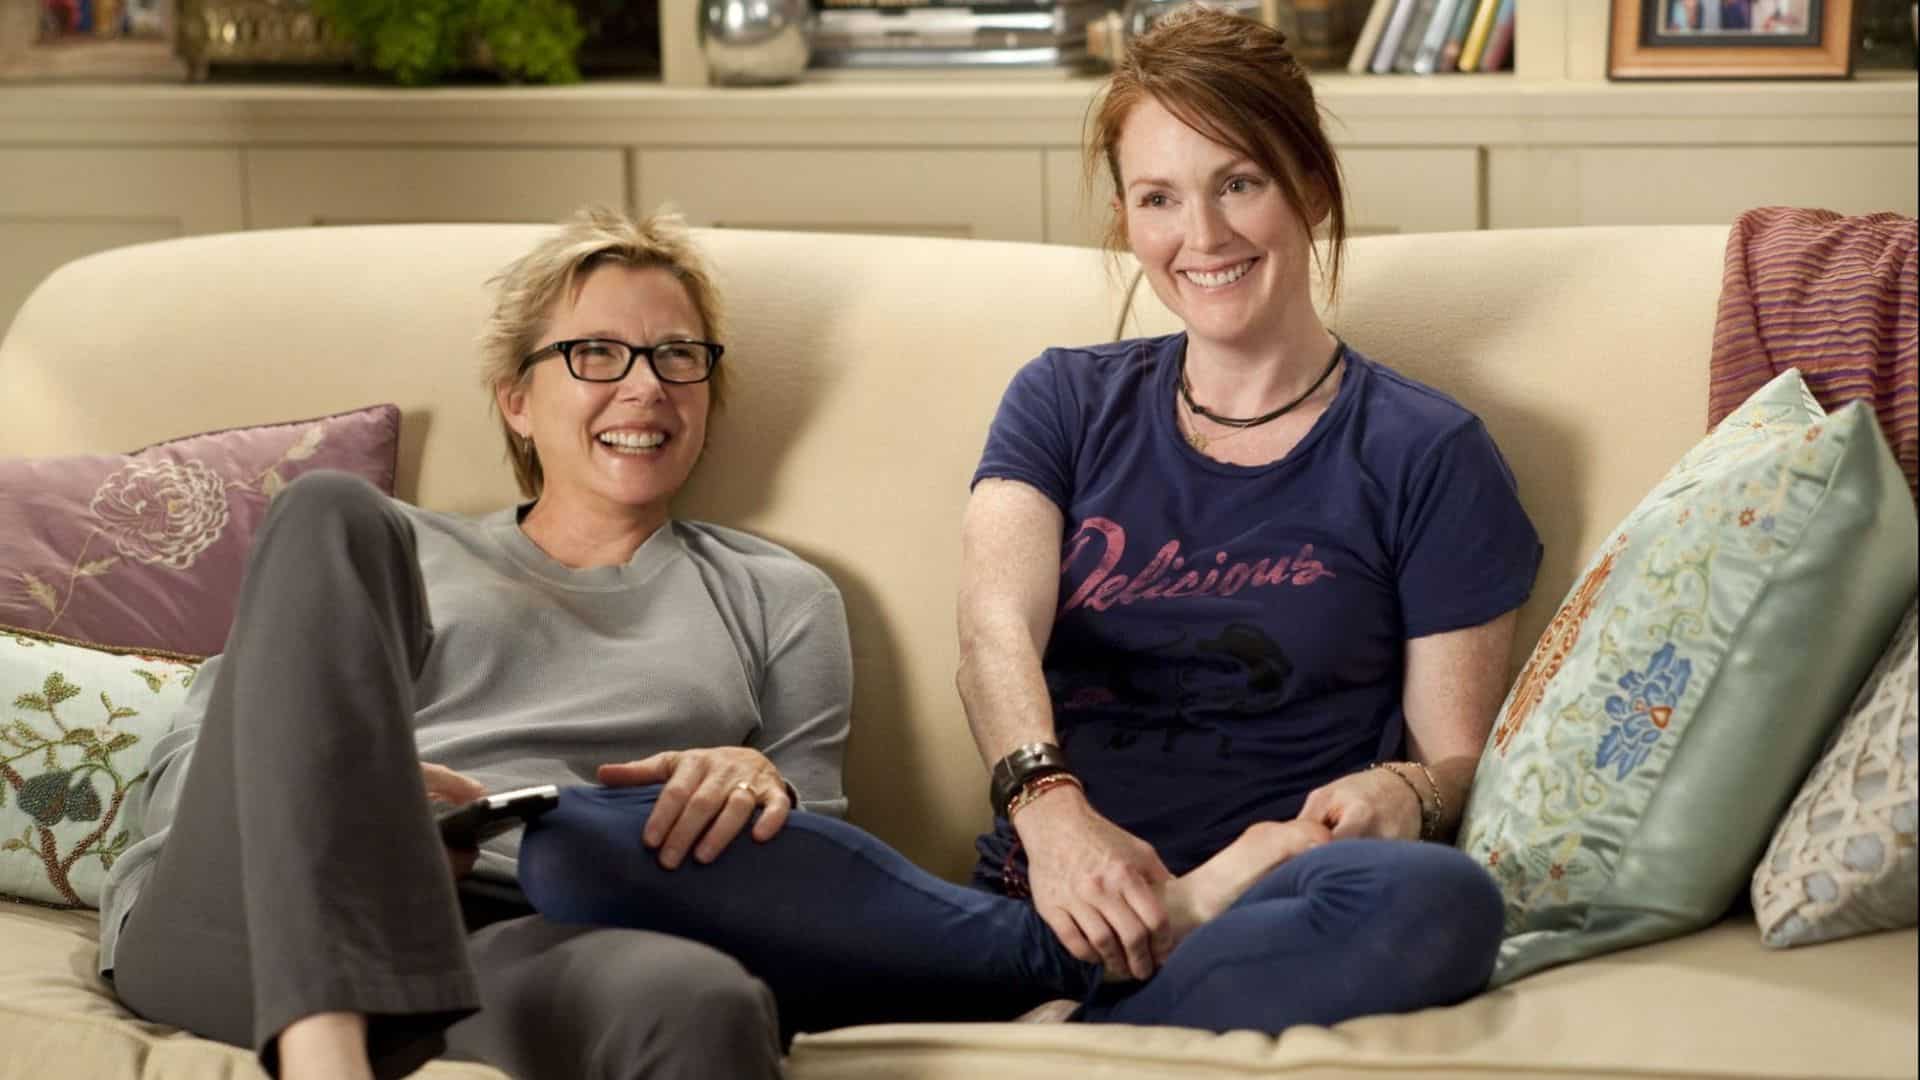 Two women smiling on a couch in this image from Focus Features.